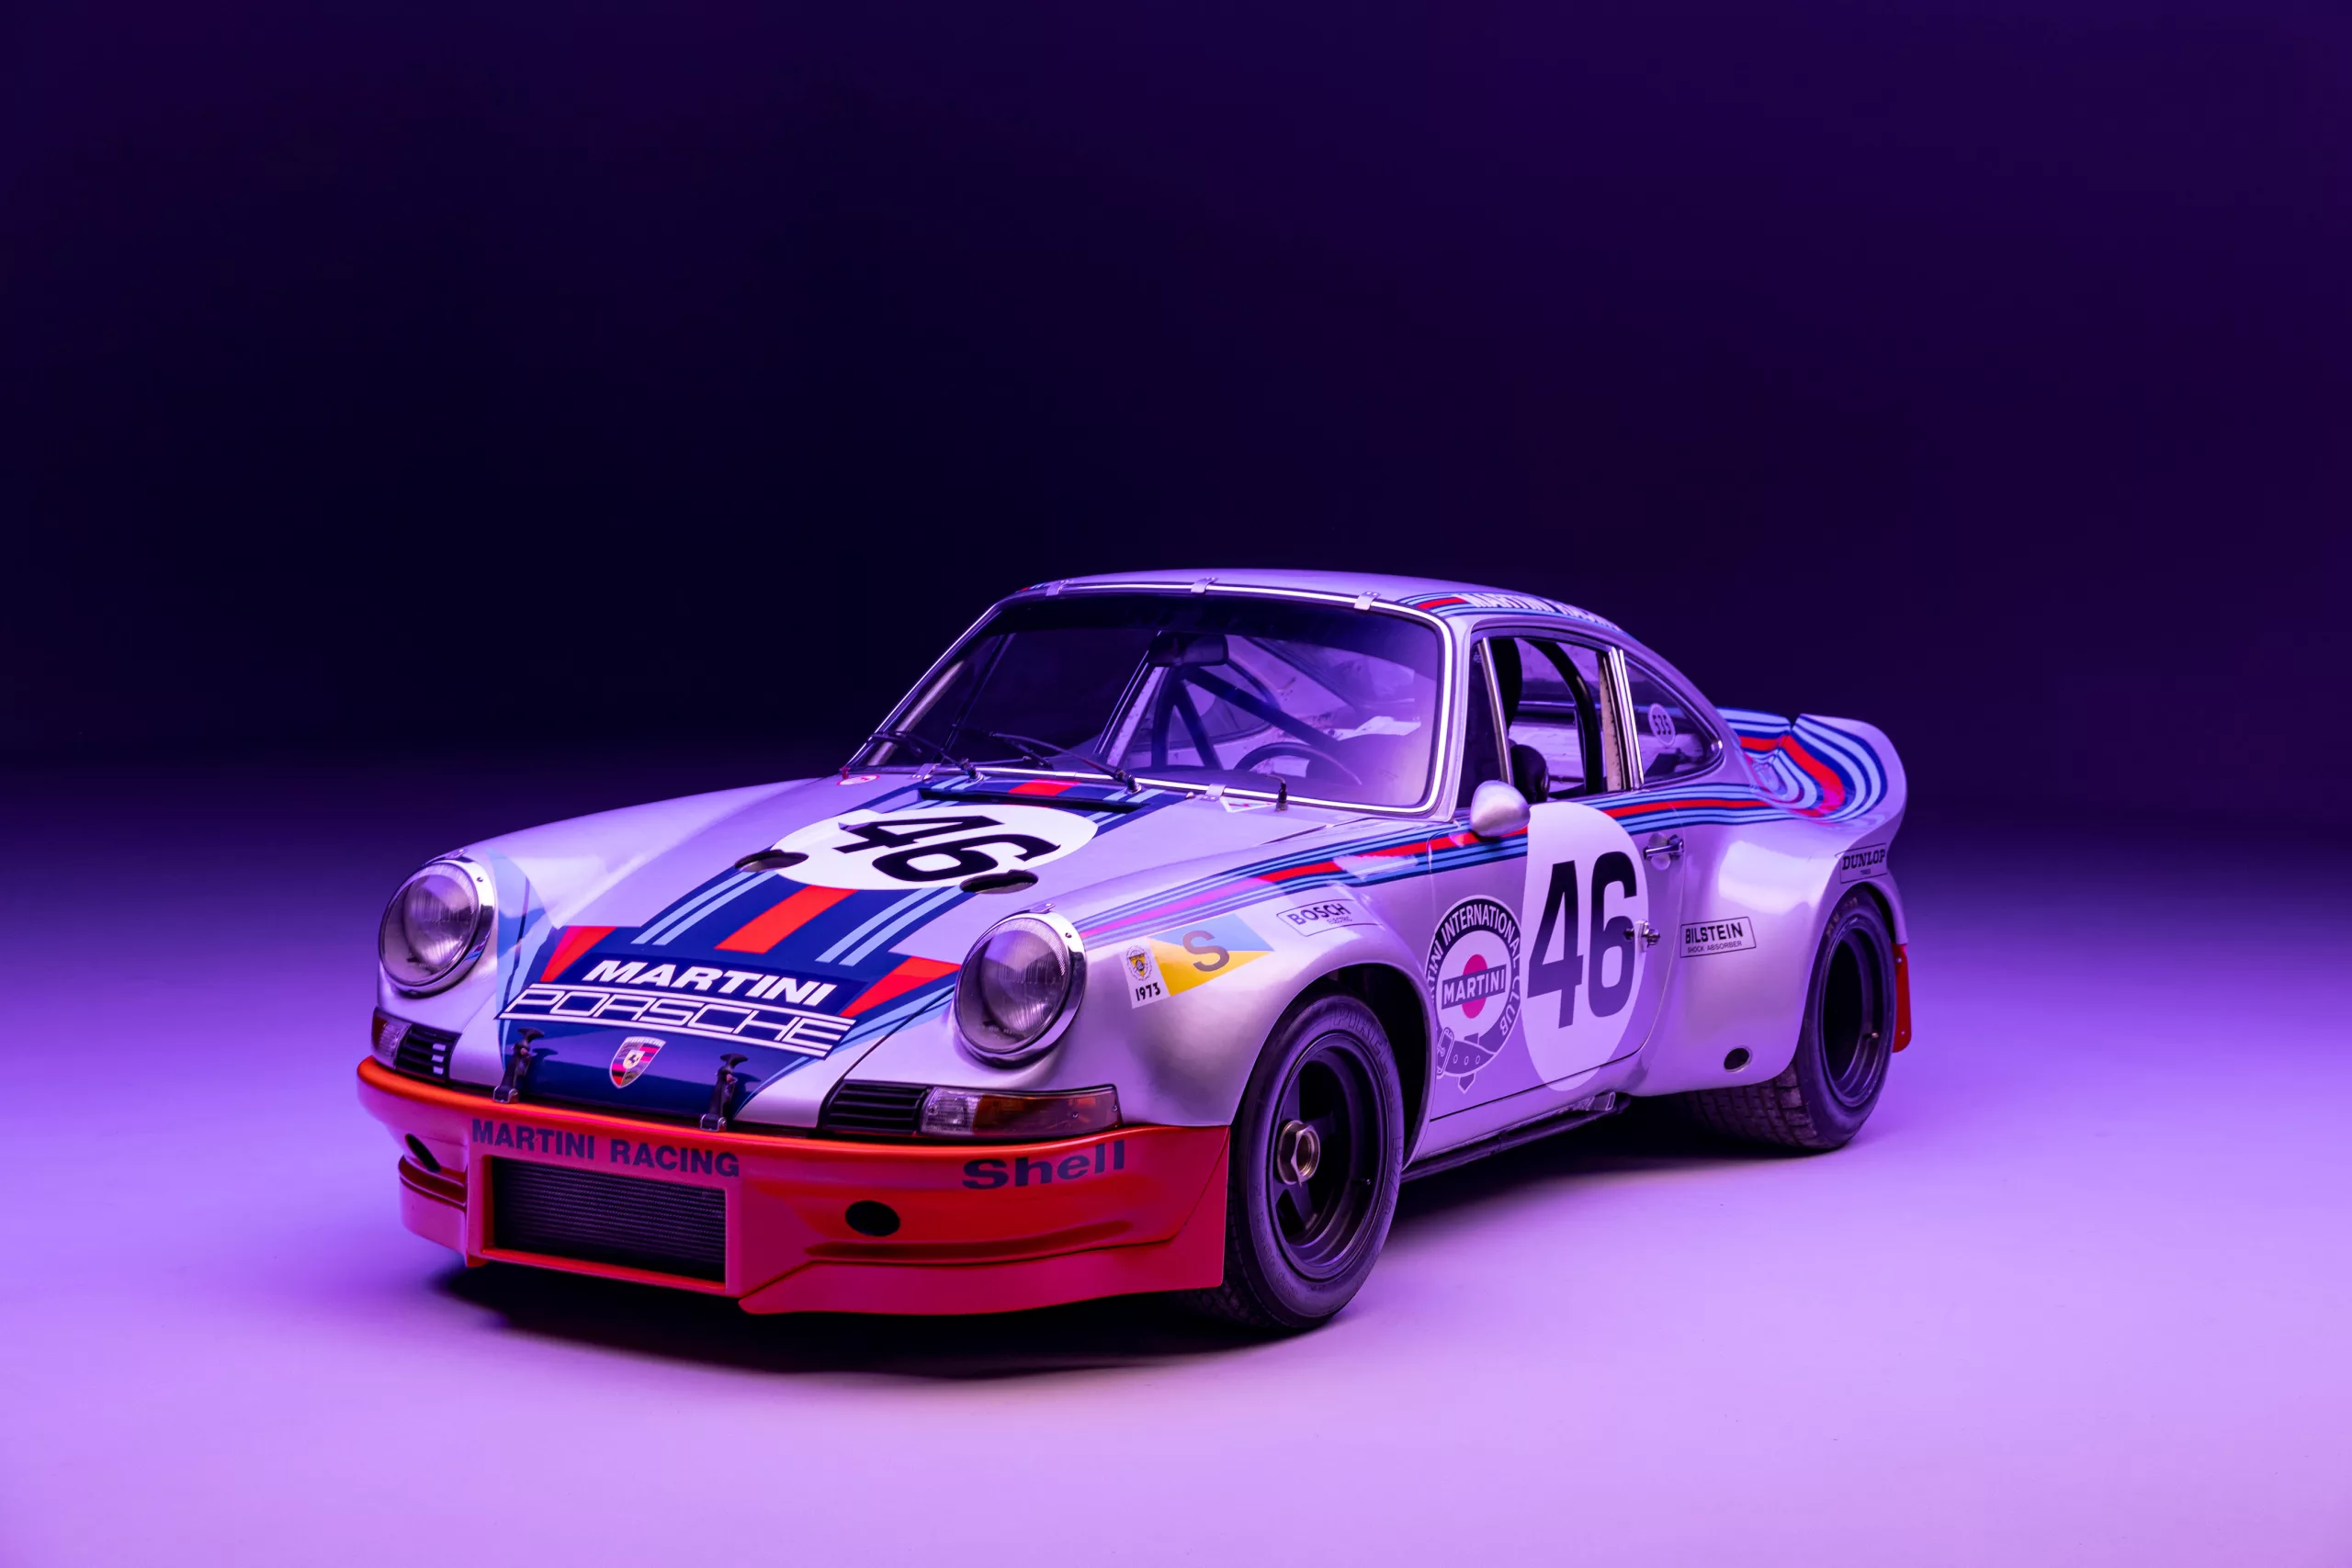 The 1970s Porsche 911 Carrera RSR Martini Racing, Valued between 4.4 and 6.7 Million Euros!